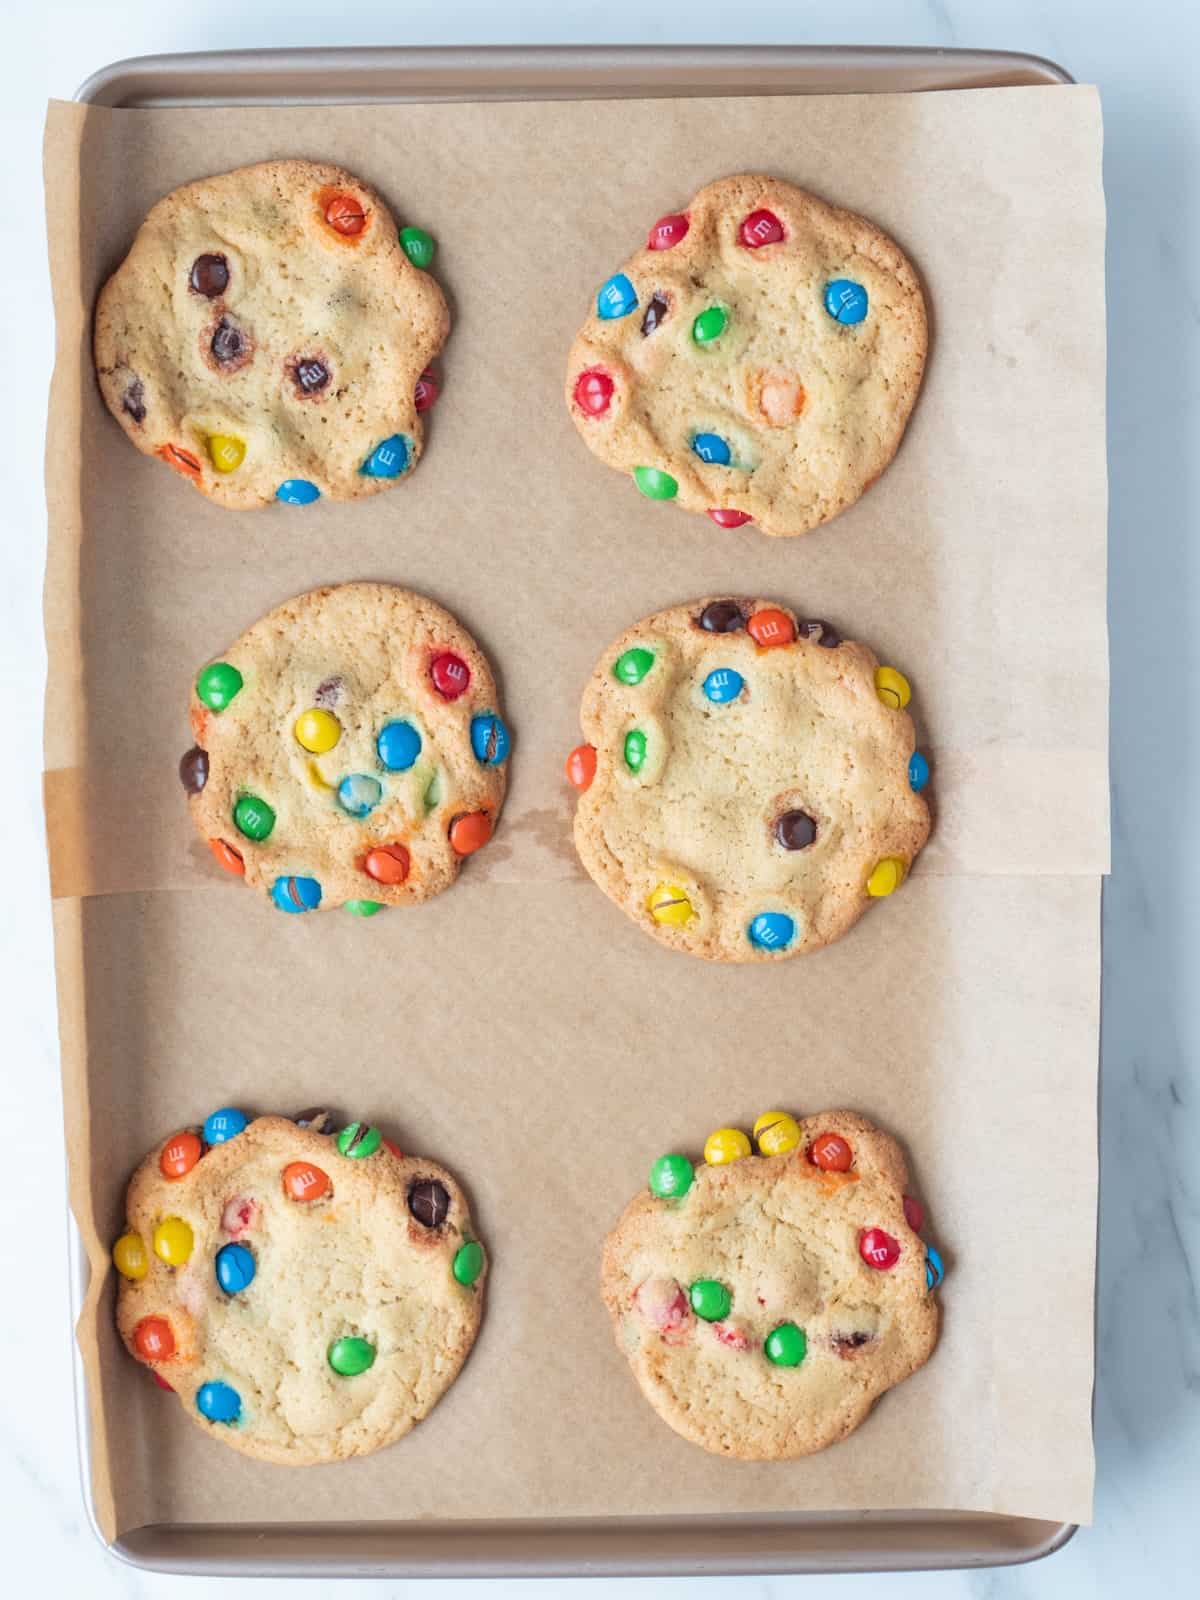 A parchment paper lined baking sheet with six freshly baked giant M&M cookies.